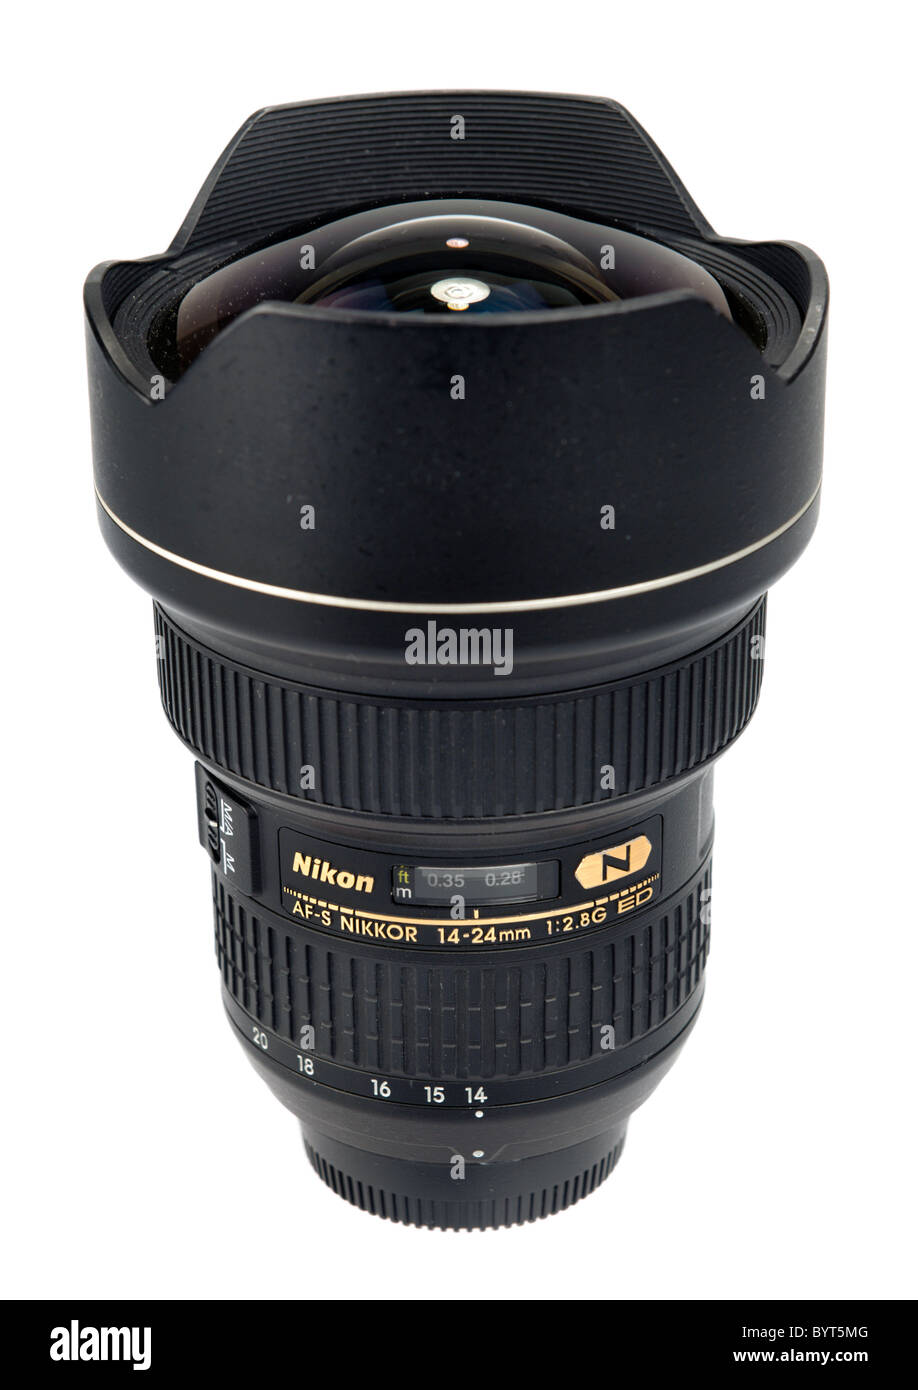 Nikkor 14-24mm f/2.8 ultra wide angle lens for Nikon cameras cutout on white background Stock Photo